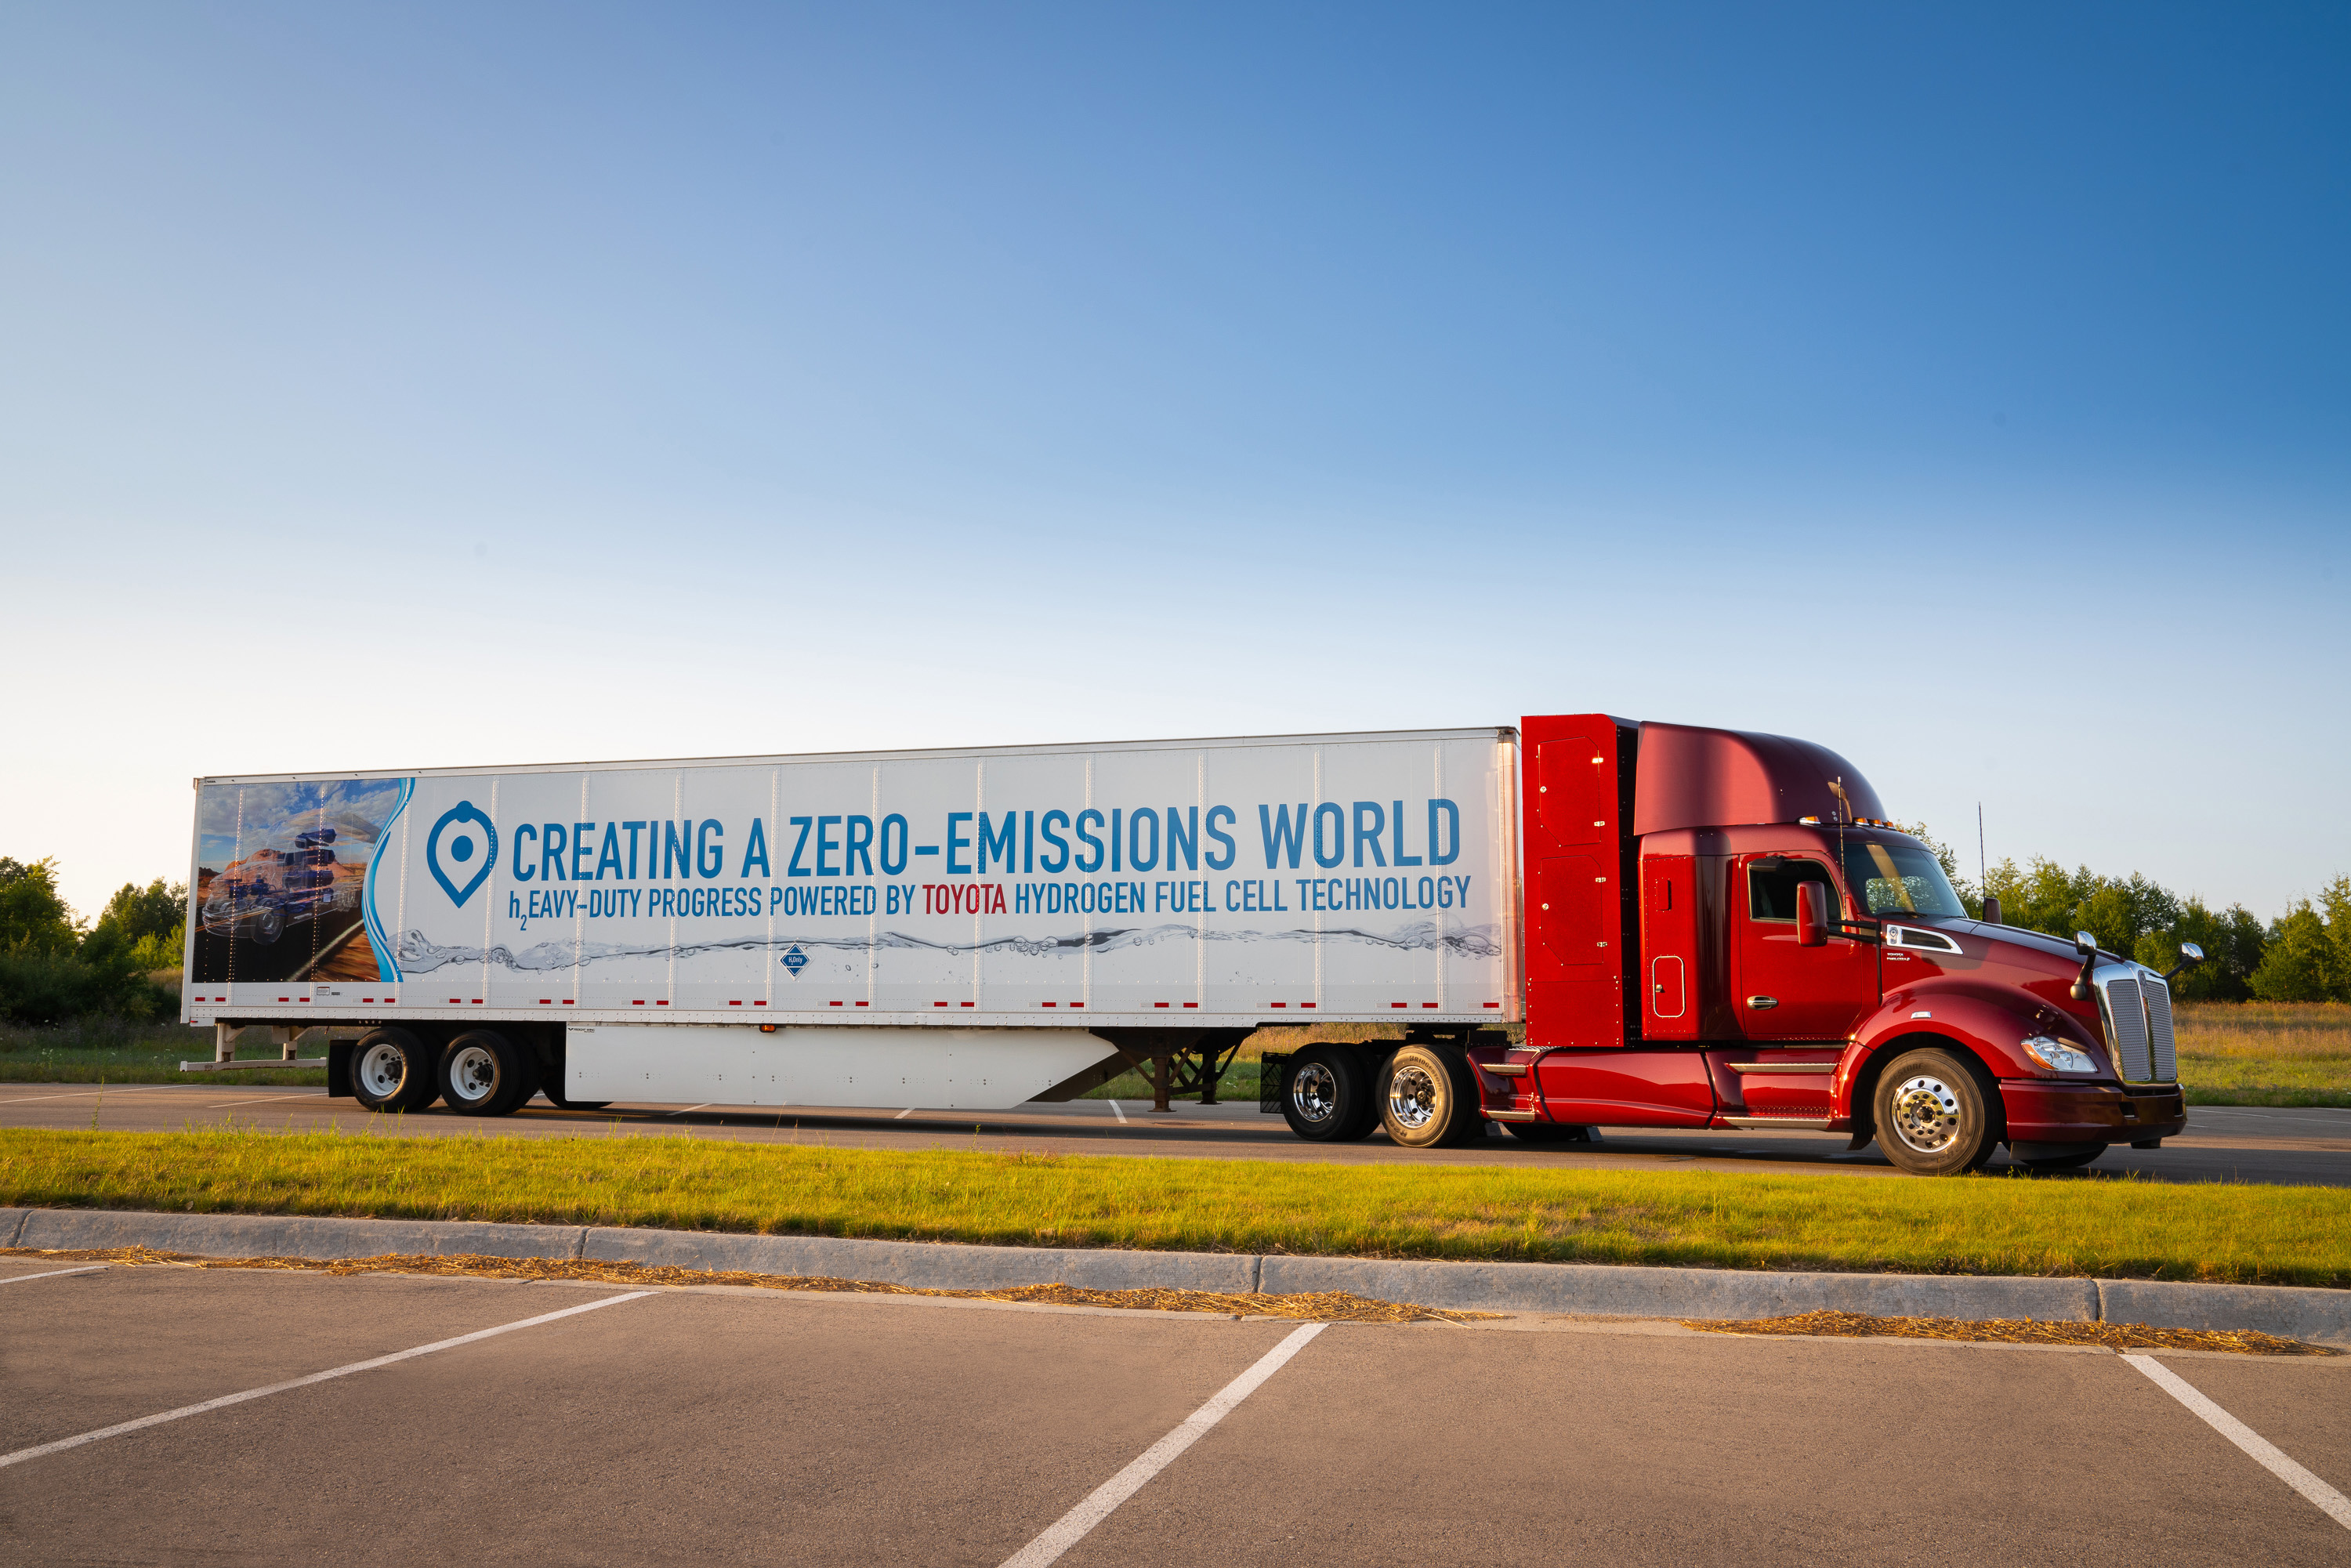 Kenworth truck with Toyota fuel cell